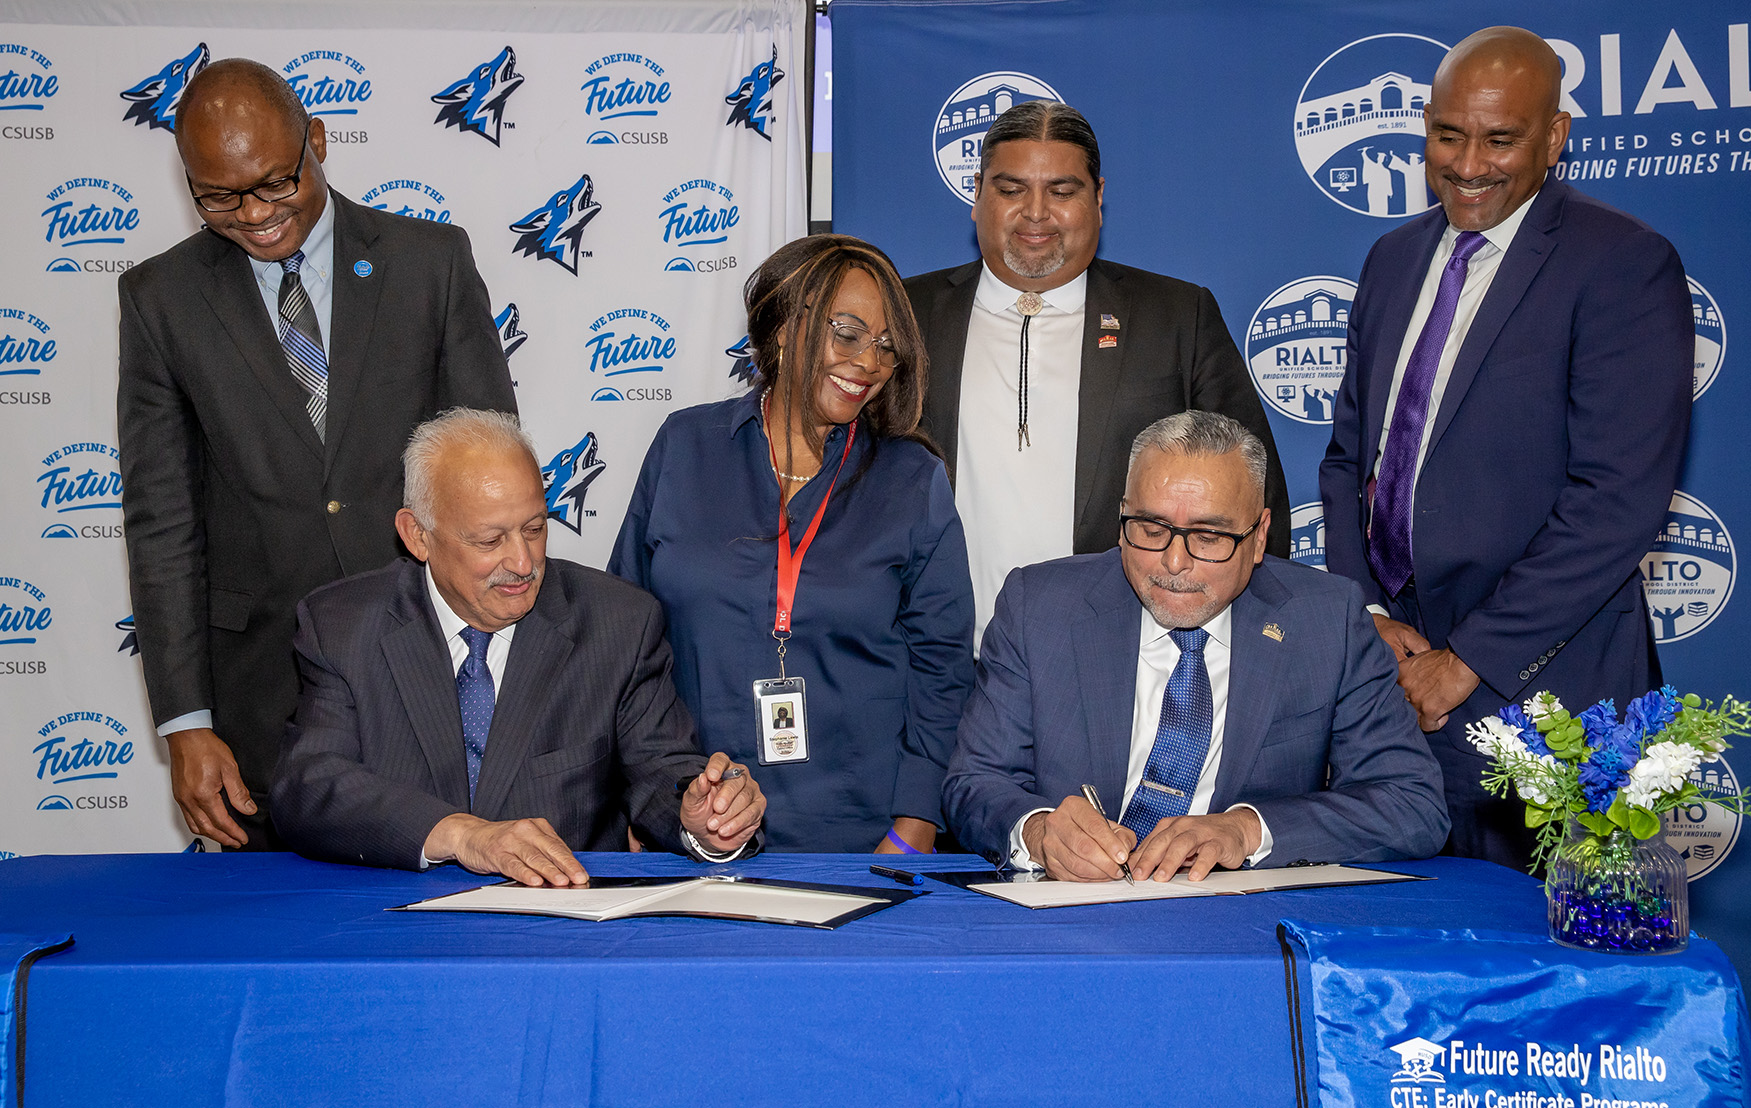 Tomás D. Morales, (left) president of CSUSB, and Cuauhtémoc Avila, superintendent Rialto Unified School District, sign the memorandum of understanding formally launching the Teach Rialto initiative. Looking on from the back row, from left, Chinaka S. DomNwachukwu, dean of the James R. Watson & Judy Rodriguez Watson College of Education, CSUSB; Stephanie E. Lewis, Rialto Unified School District board member; Edgar Montes, Rialto Unified School District board member; and Rafik Mohamed, provost and vice president of Academic Affairs, CSUSB.